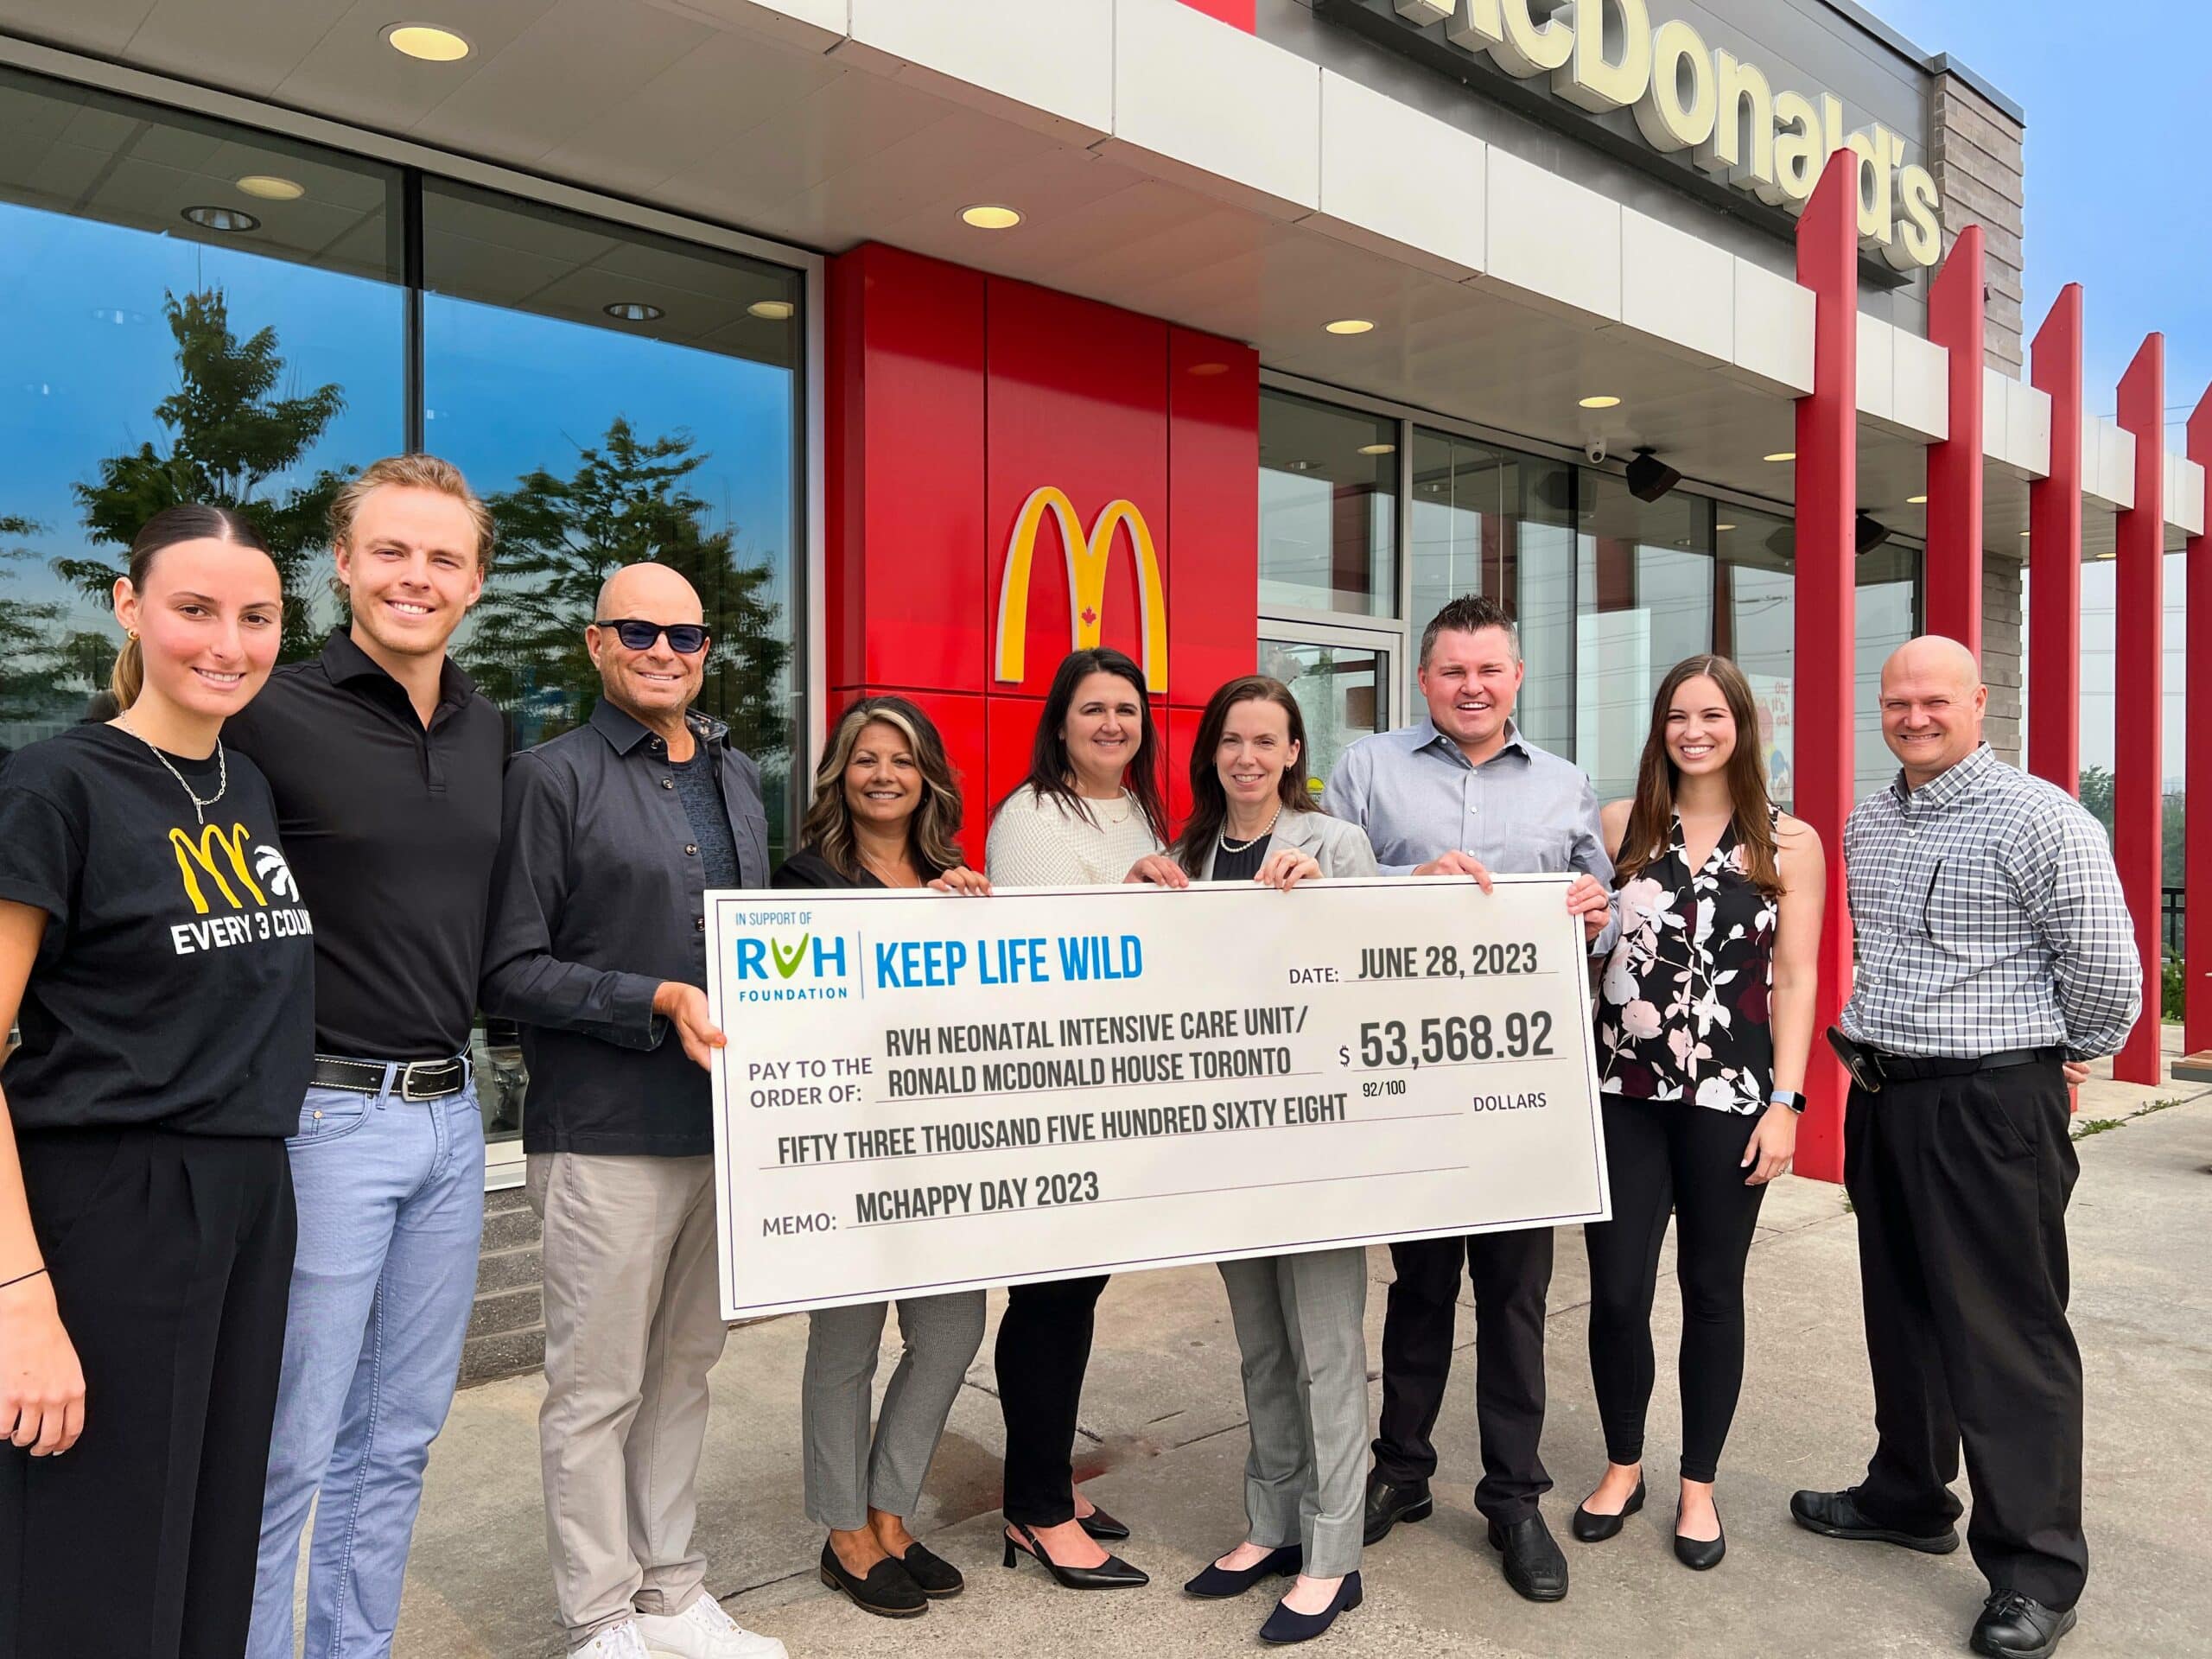 Barrie McDonald’s restaurants raise over $53K on McHappy Day supporting RVH’s Neonatal Intensive Care Unit and Ronald McDonald House Toronto